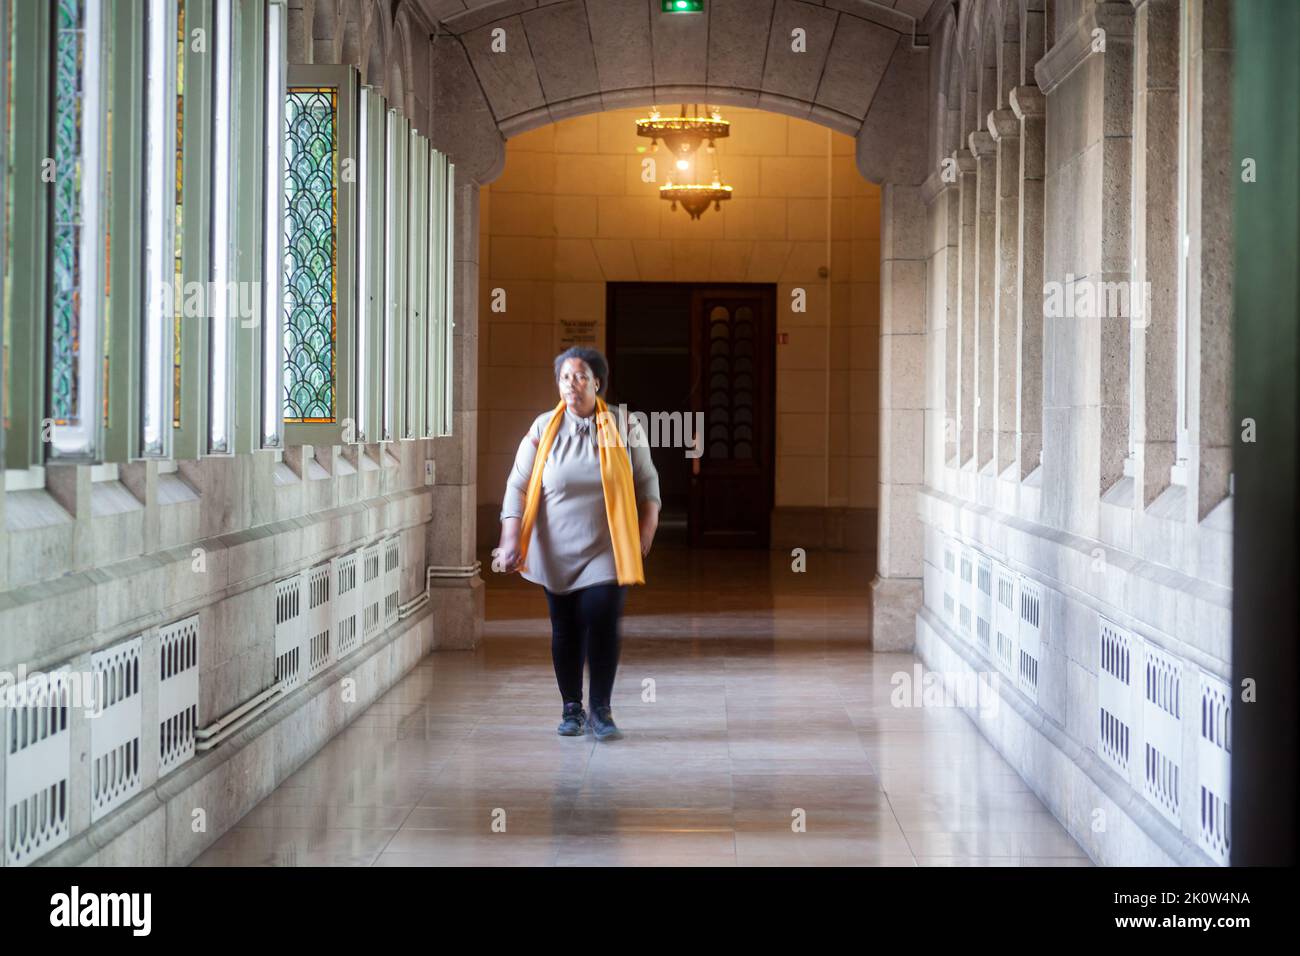 Paris, France - July, 15: Woman walking in the hallway of the Sacred Heart of Montmartre called Sacré Coeur on July 15, 2022 Stock Photo